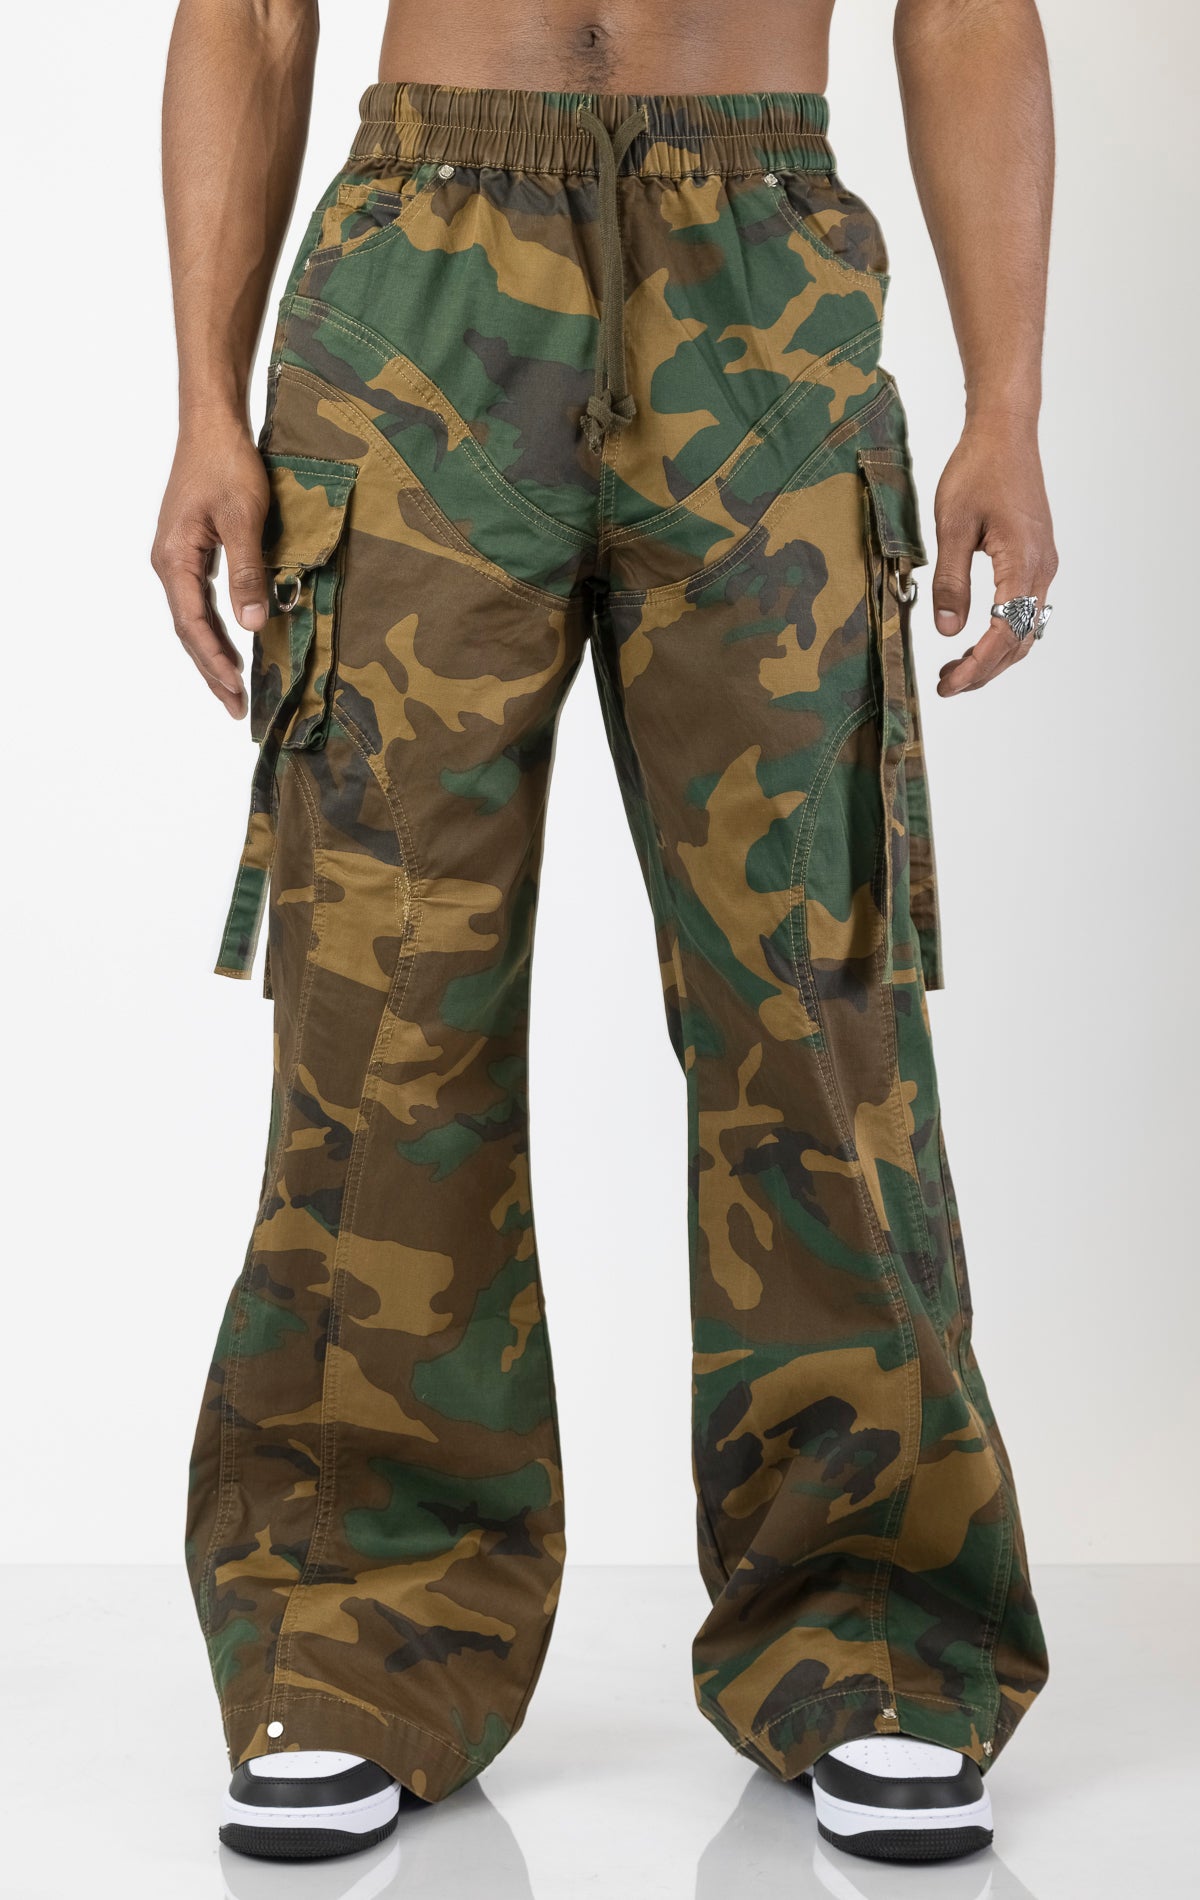 Men's baggy cargo pants in camo. The pants feature a wide, relaxed fit from the waist down, paneled construction, spacious cargo pockets with loop closures and functional tightening straps, and custom hardware. Made from a blend of 98% cotton and 2% spandex.  